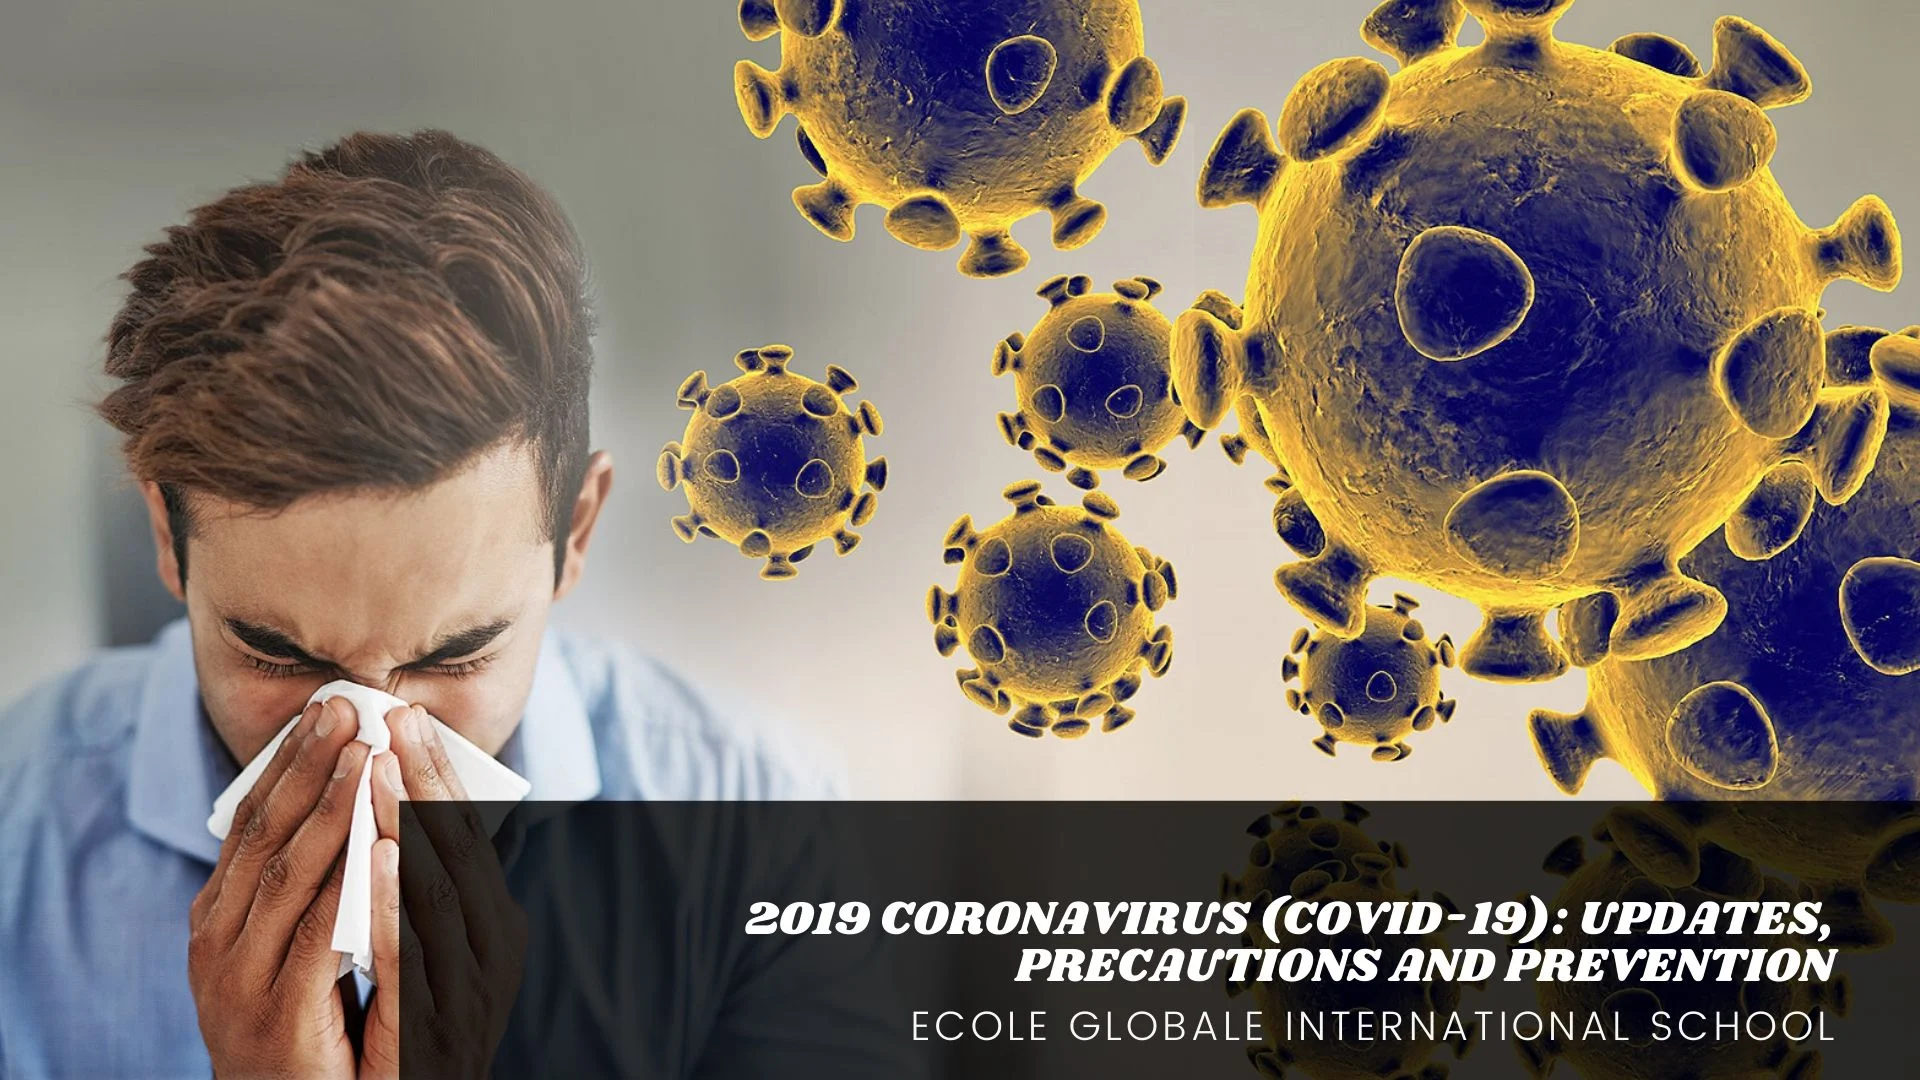 You are currently viewing 2019 CORONAVIRUS (COVID-19): UPDATES, PRECAUTIONS AND PREVENTION